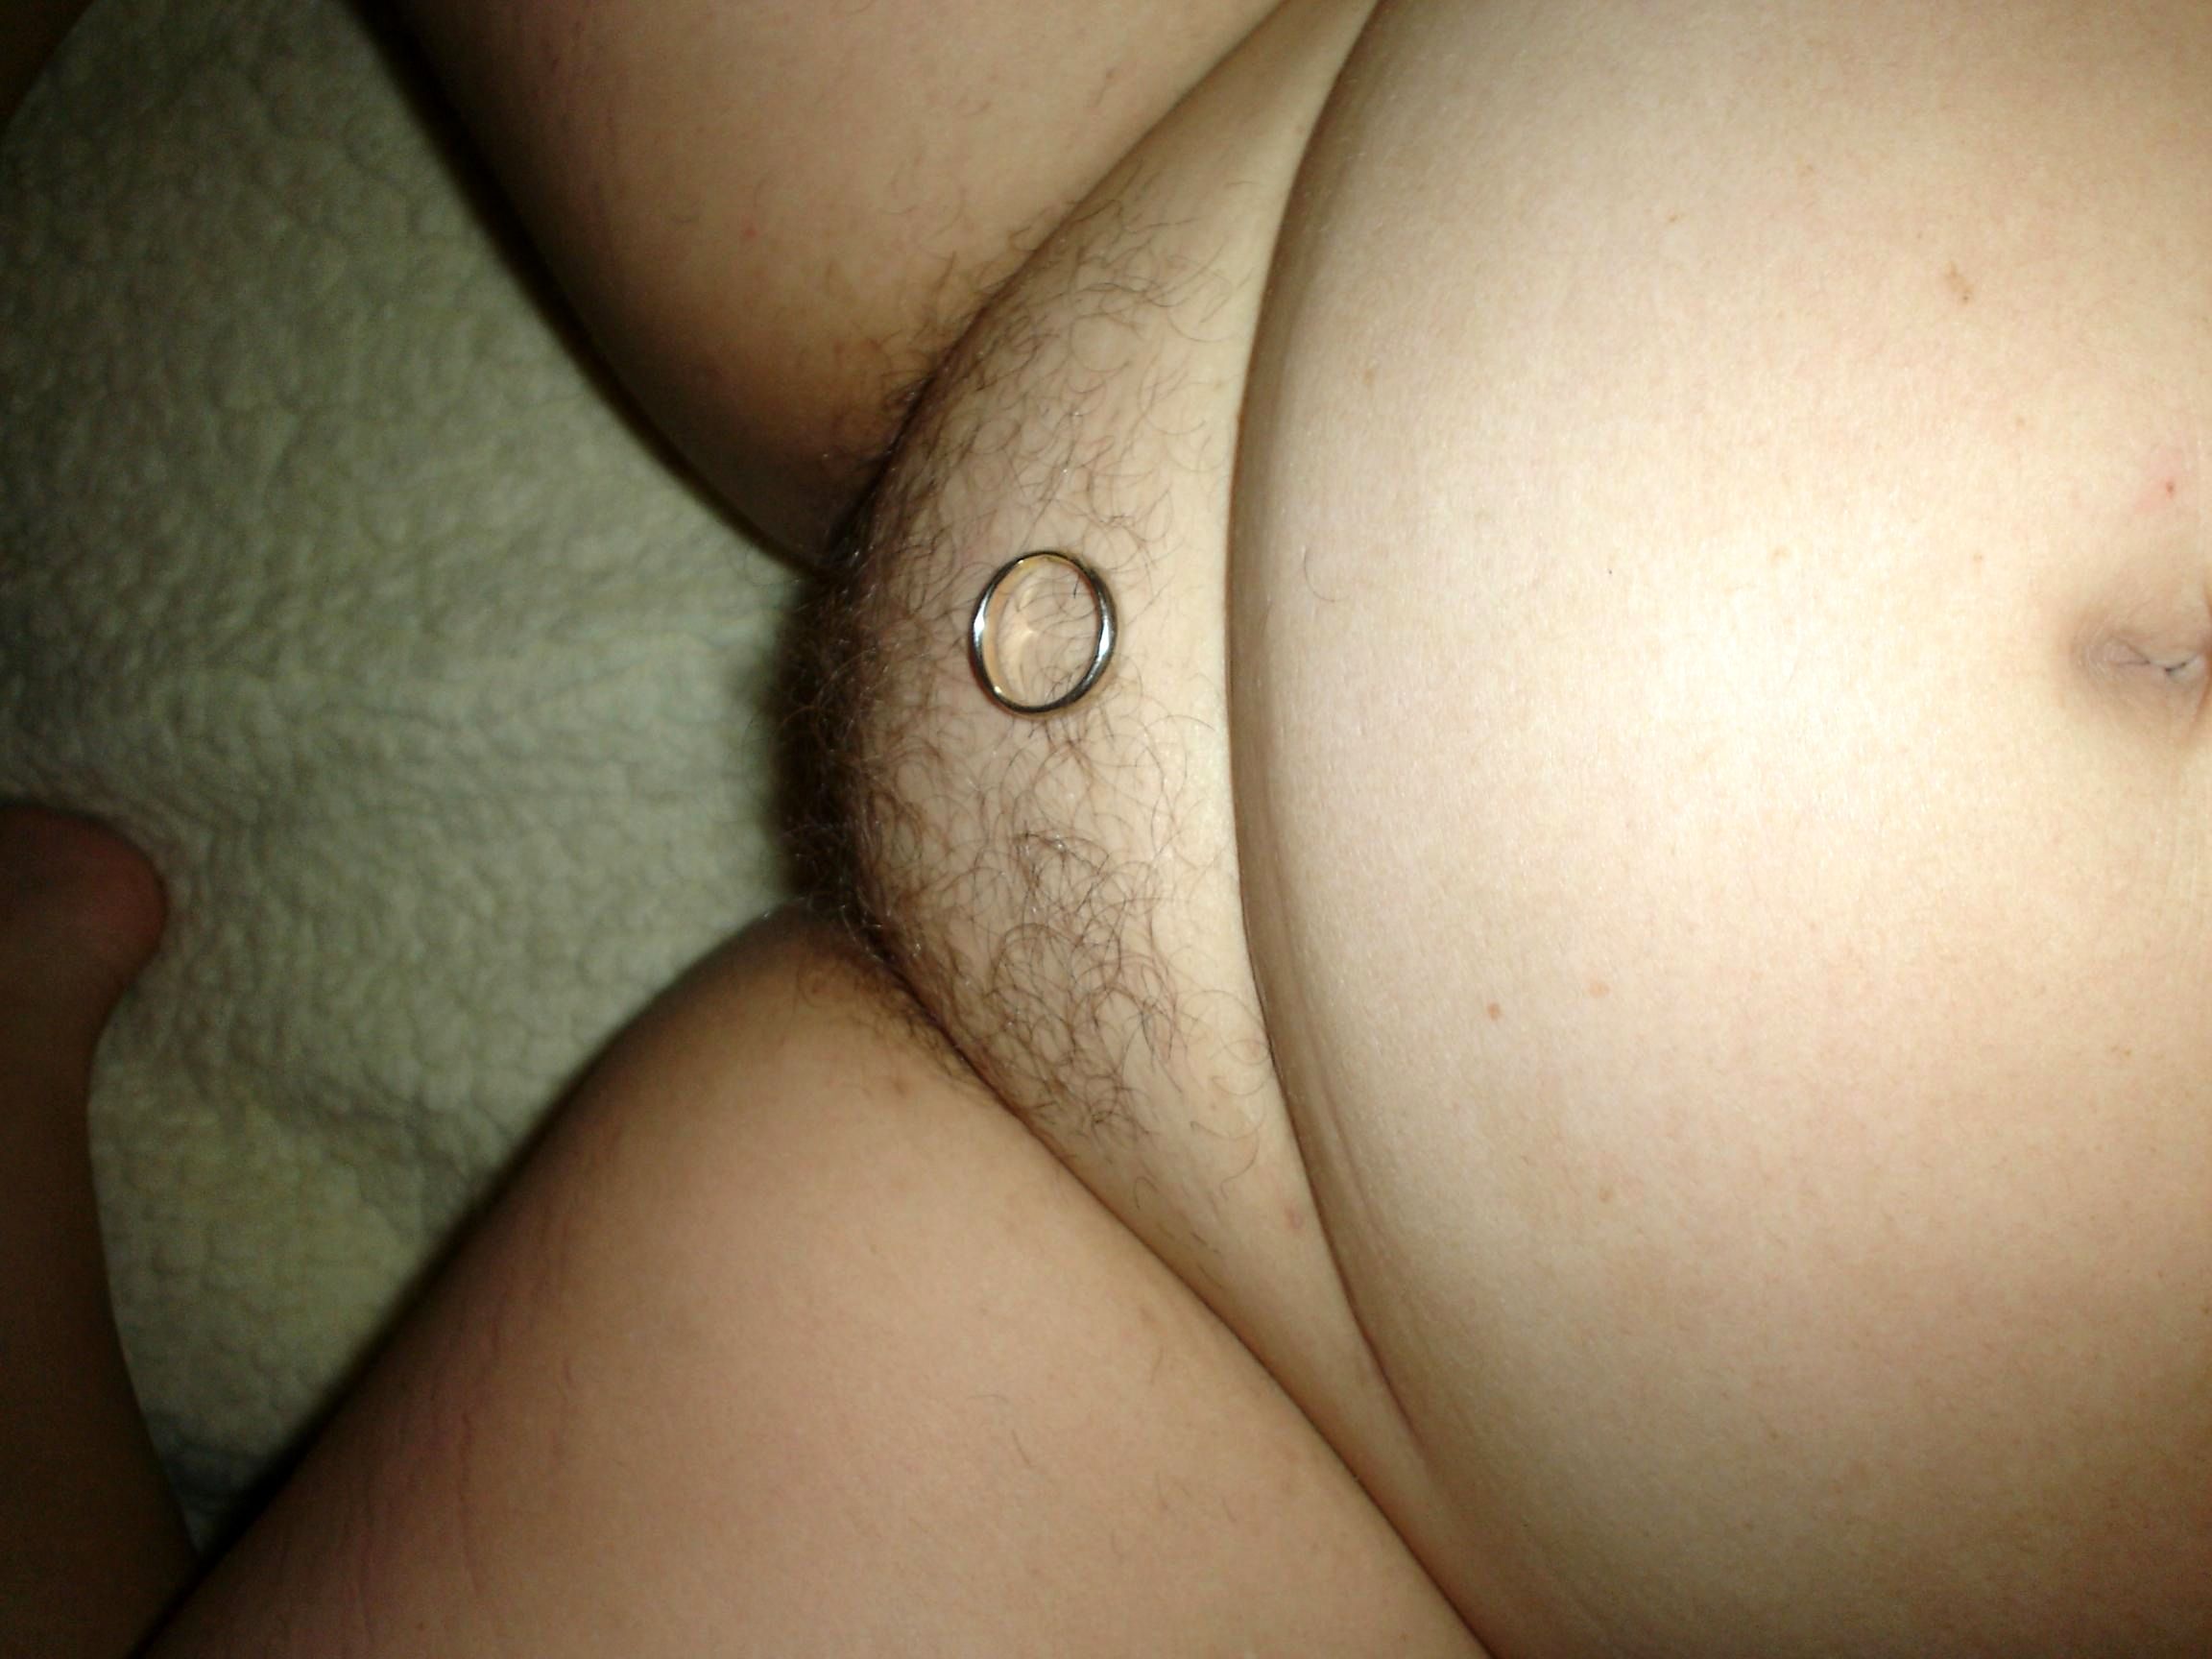 Married ring on my pubis!